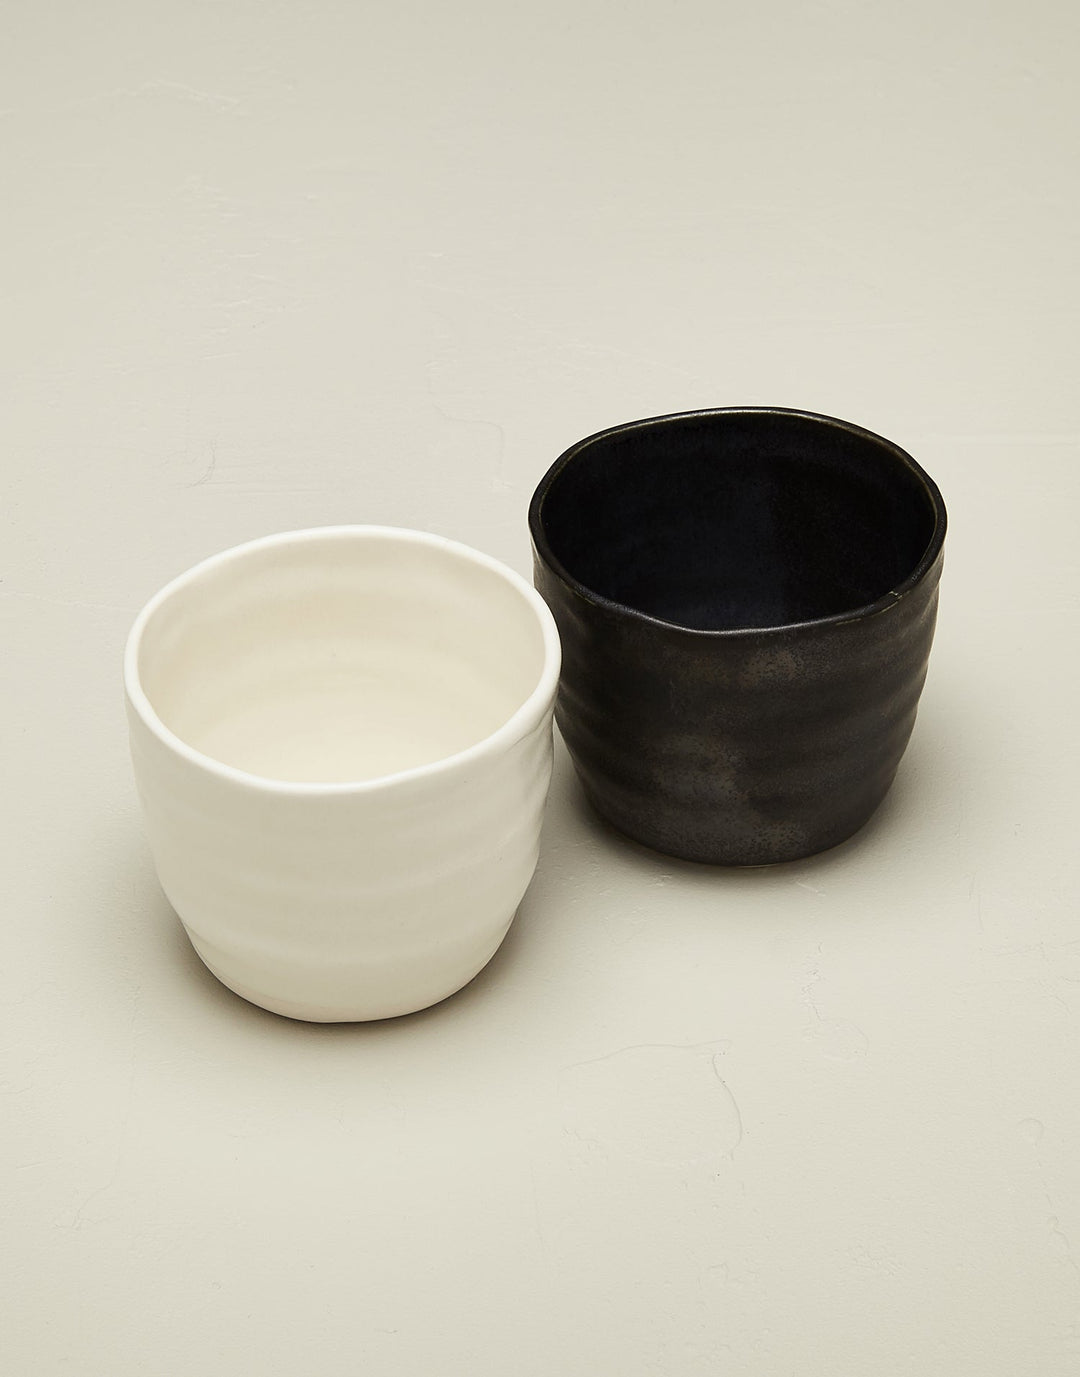 Artisan ceramic black and white bare tumbler cups in snowflake and mussel glaze